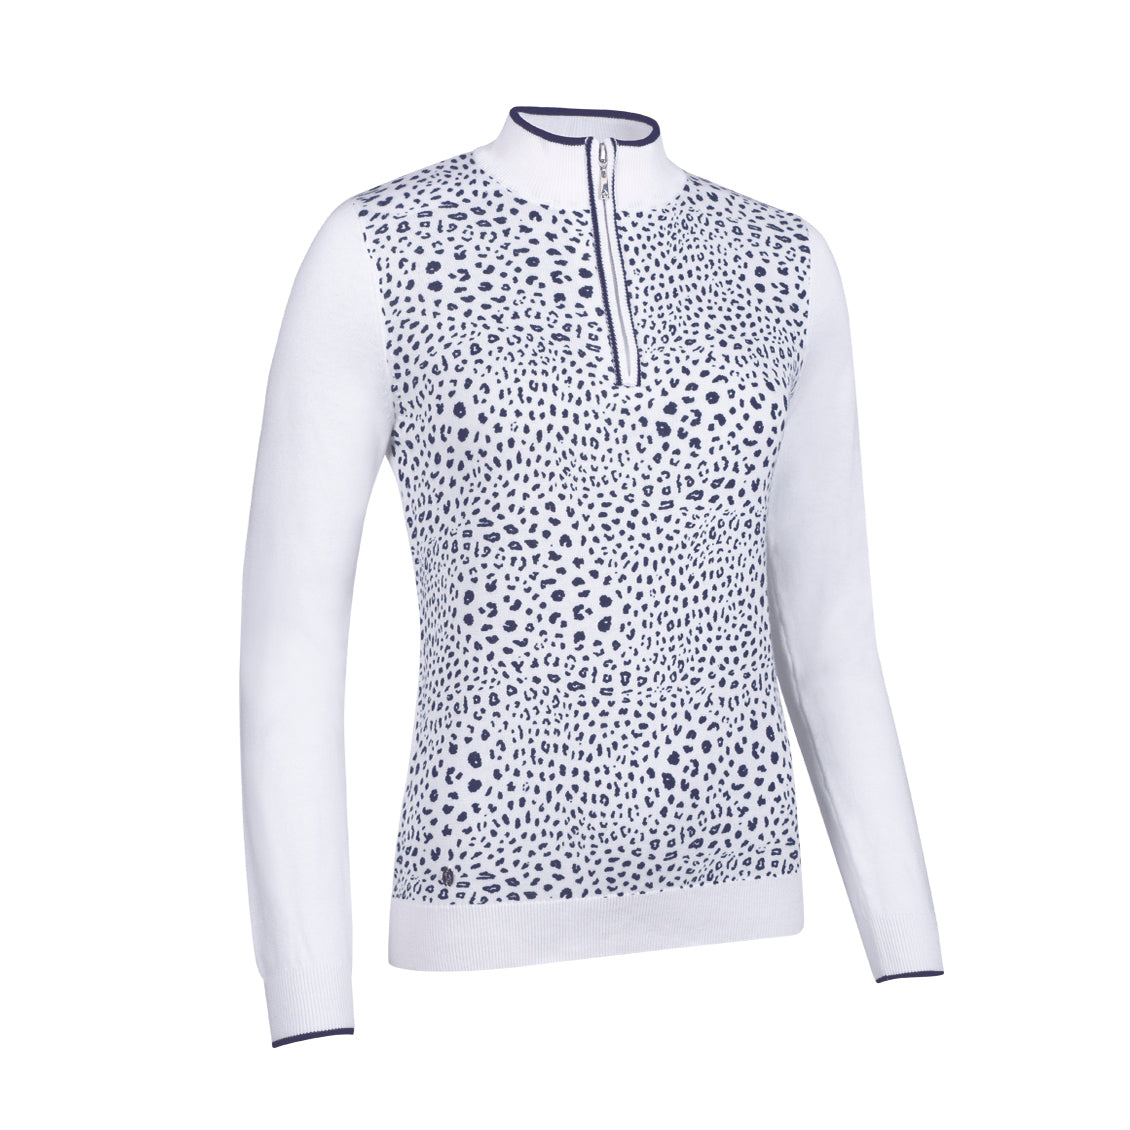 Glenmuir Ladies Long Sleeve Cotton Sweater with Animal Print Detail in White/Navy